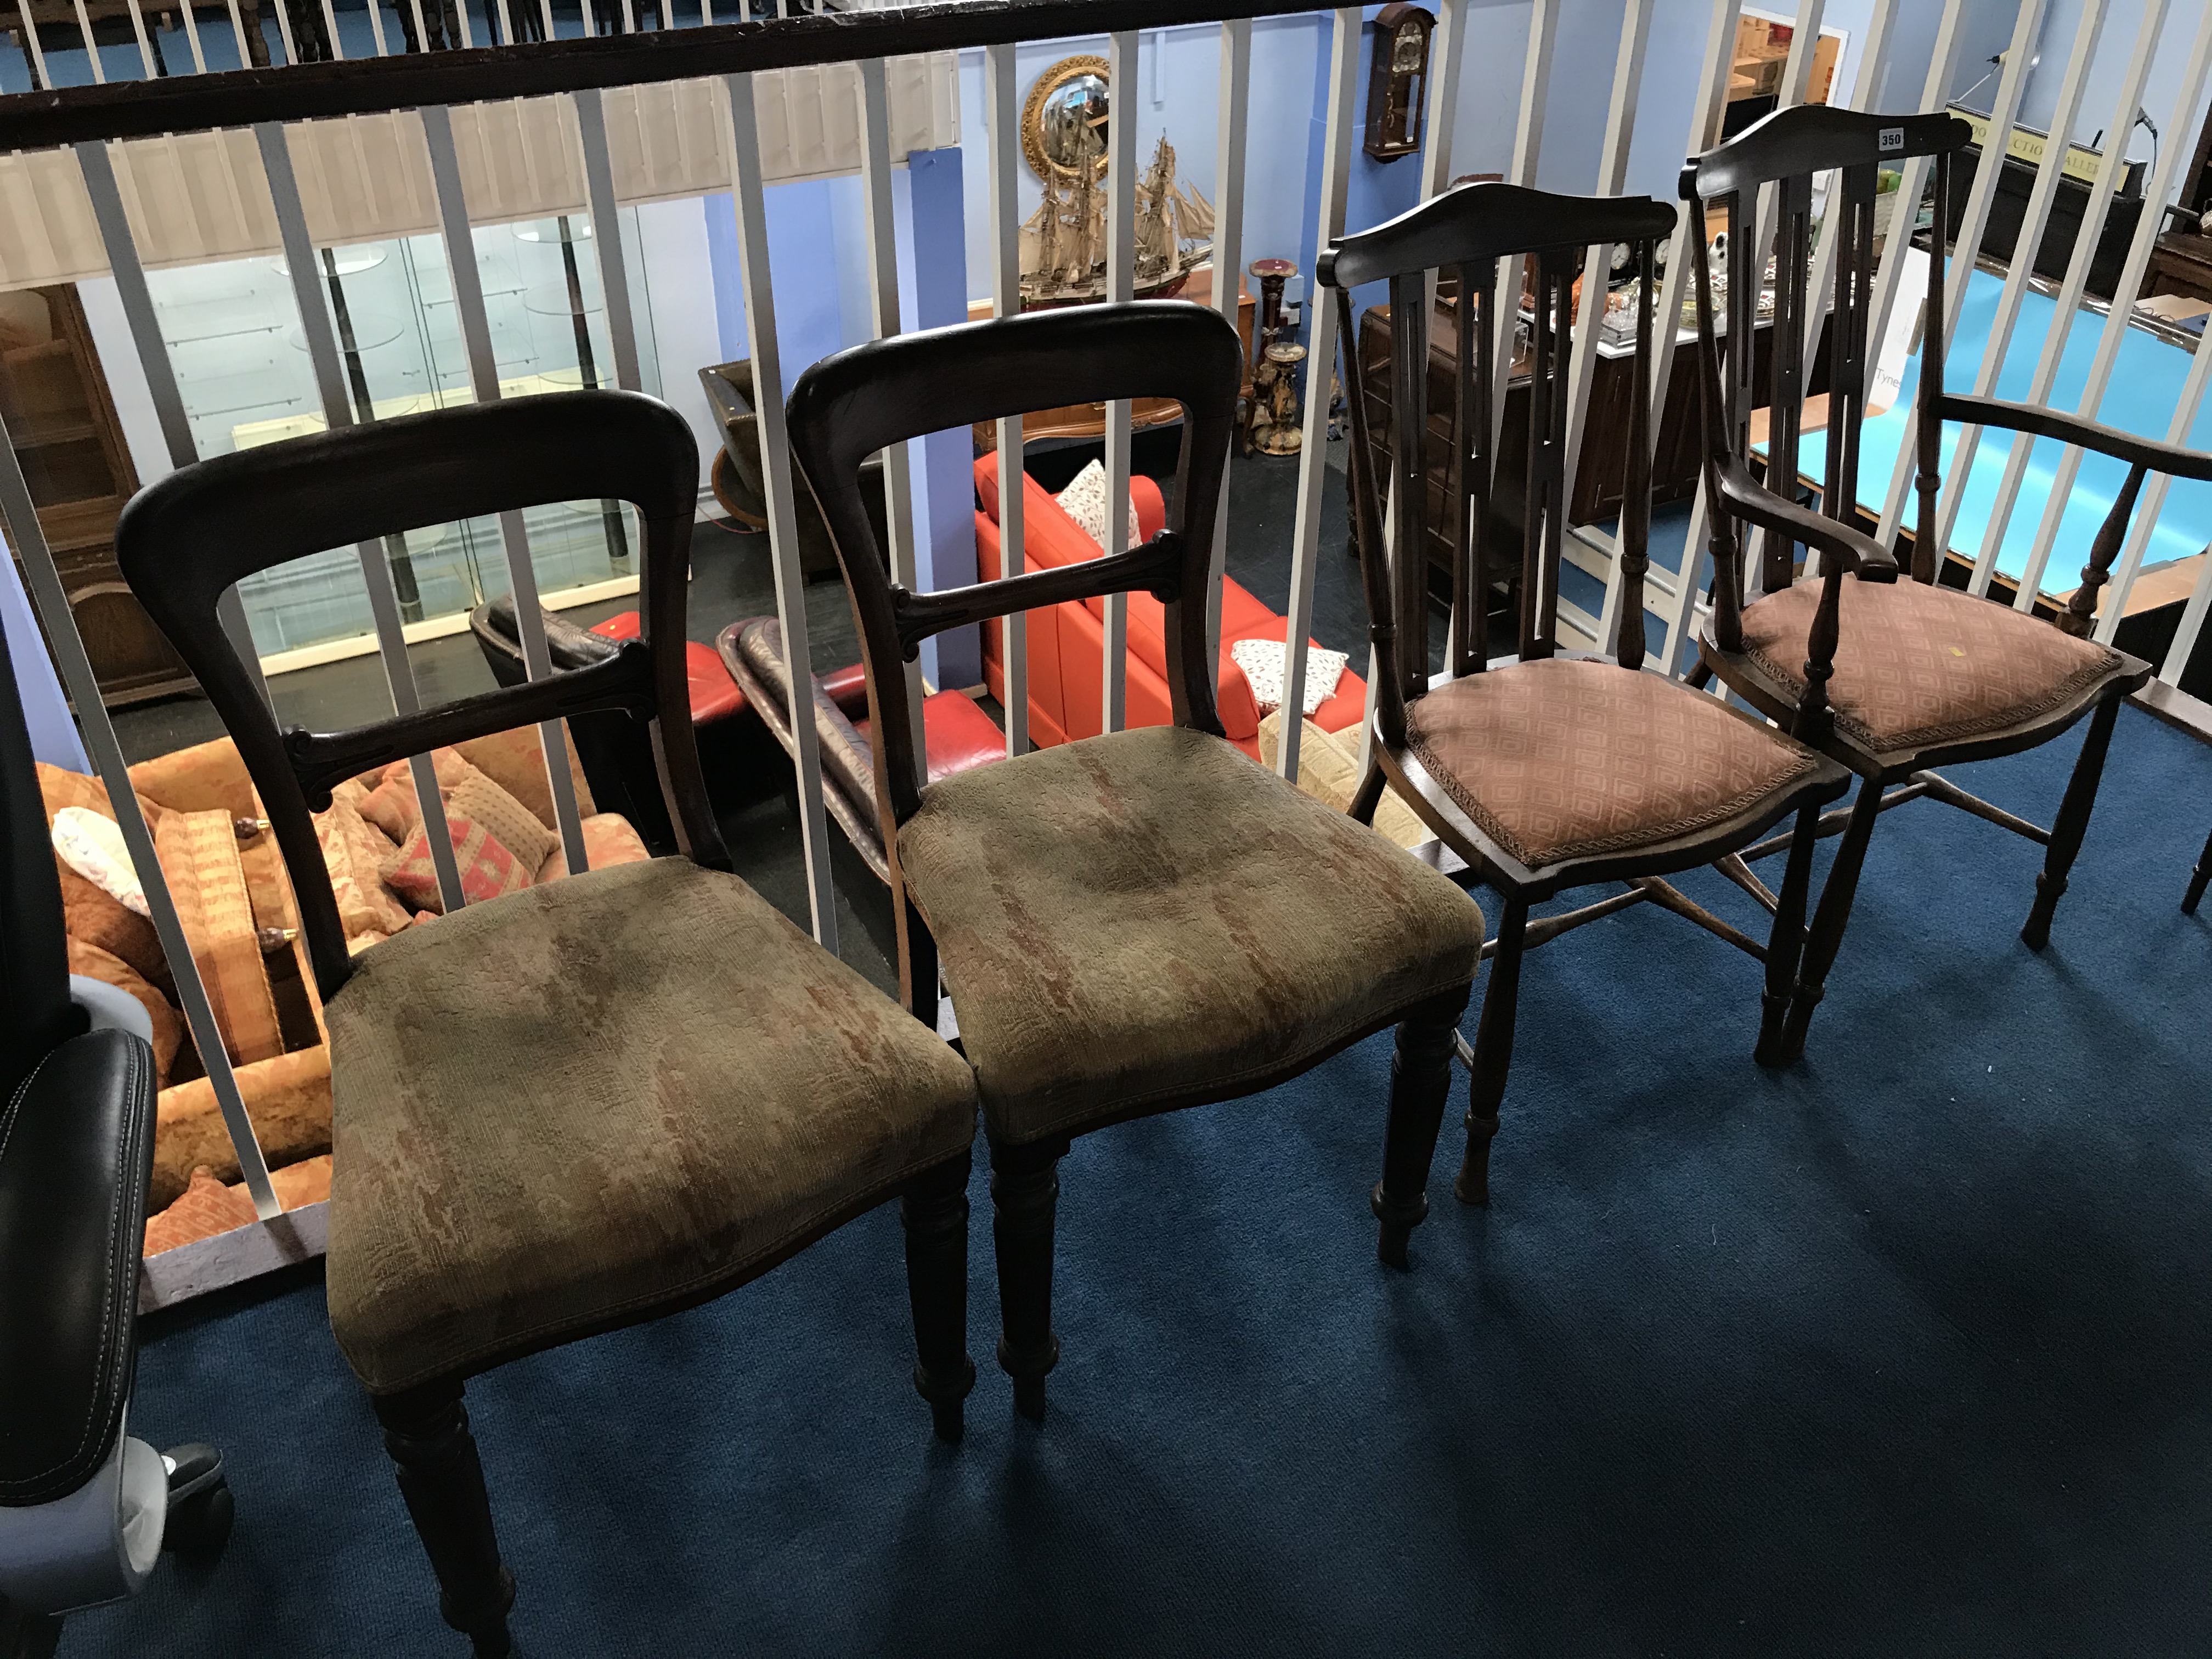 Four chairs